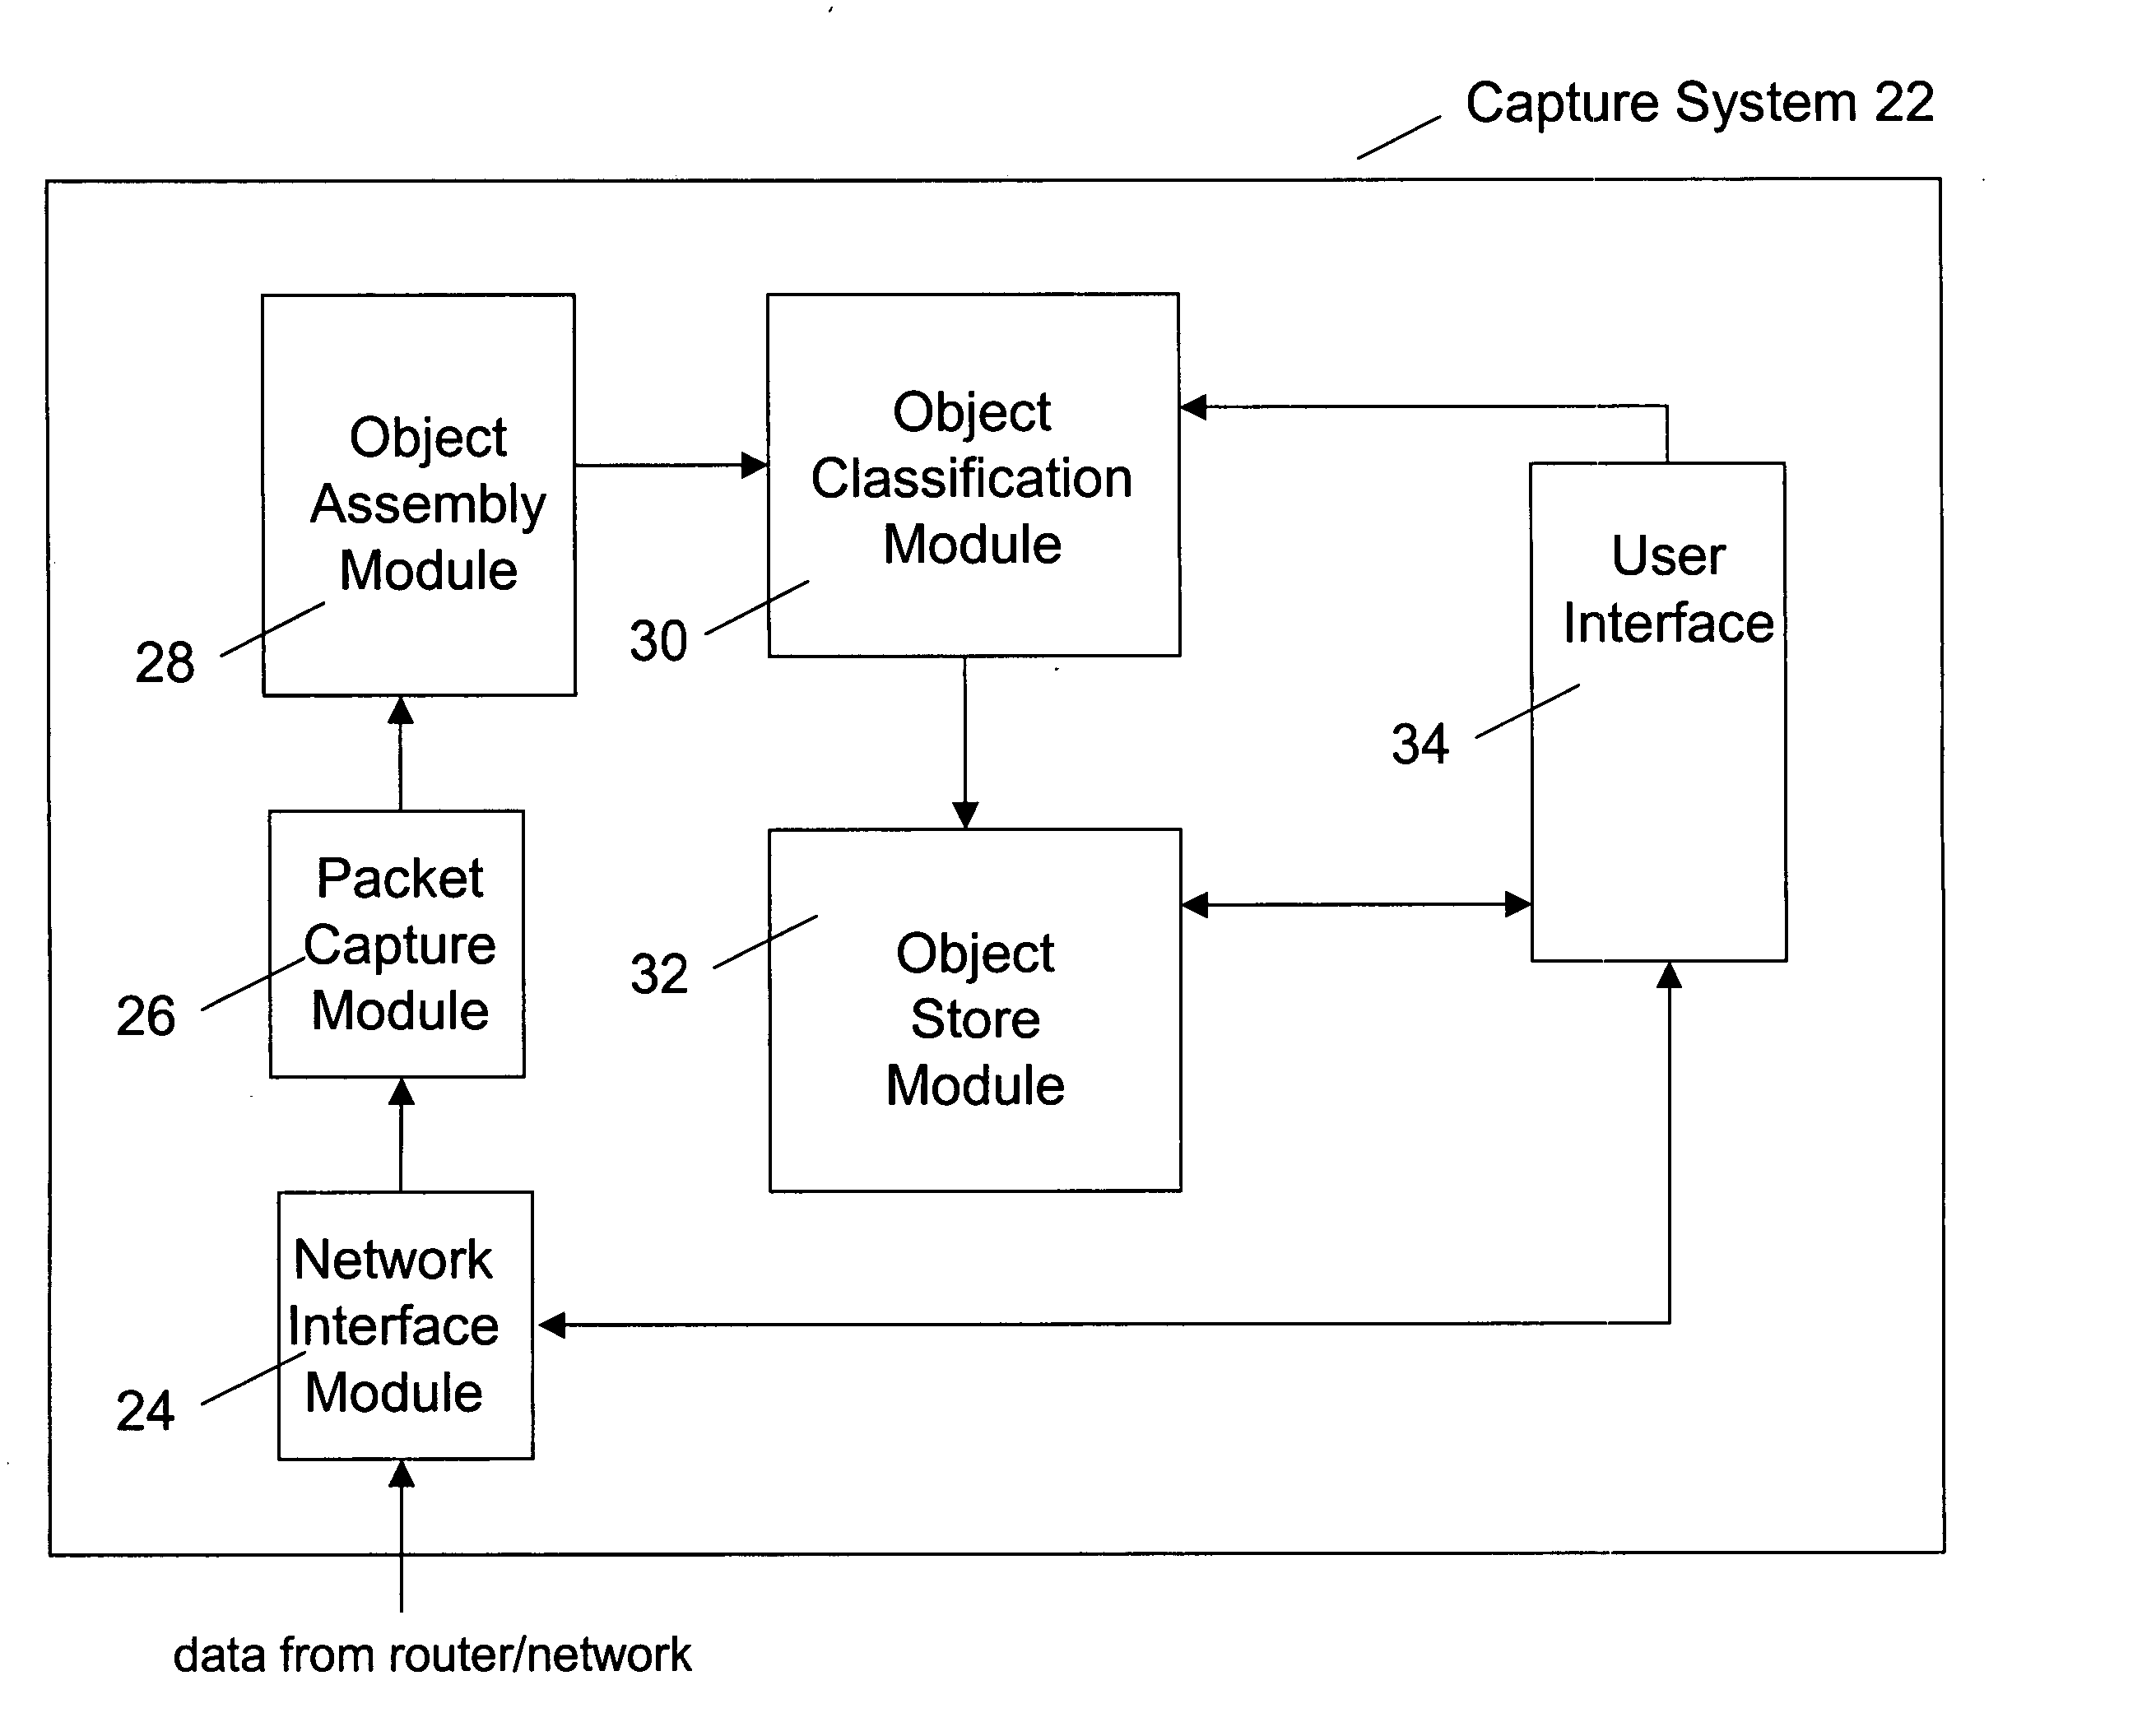 Object classification in a capture system